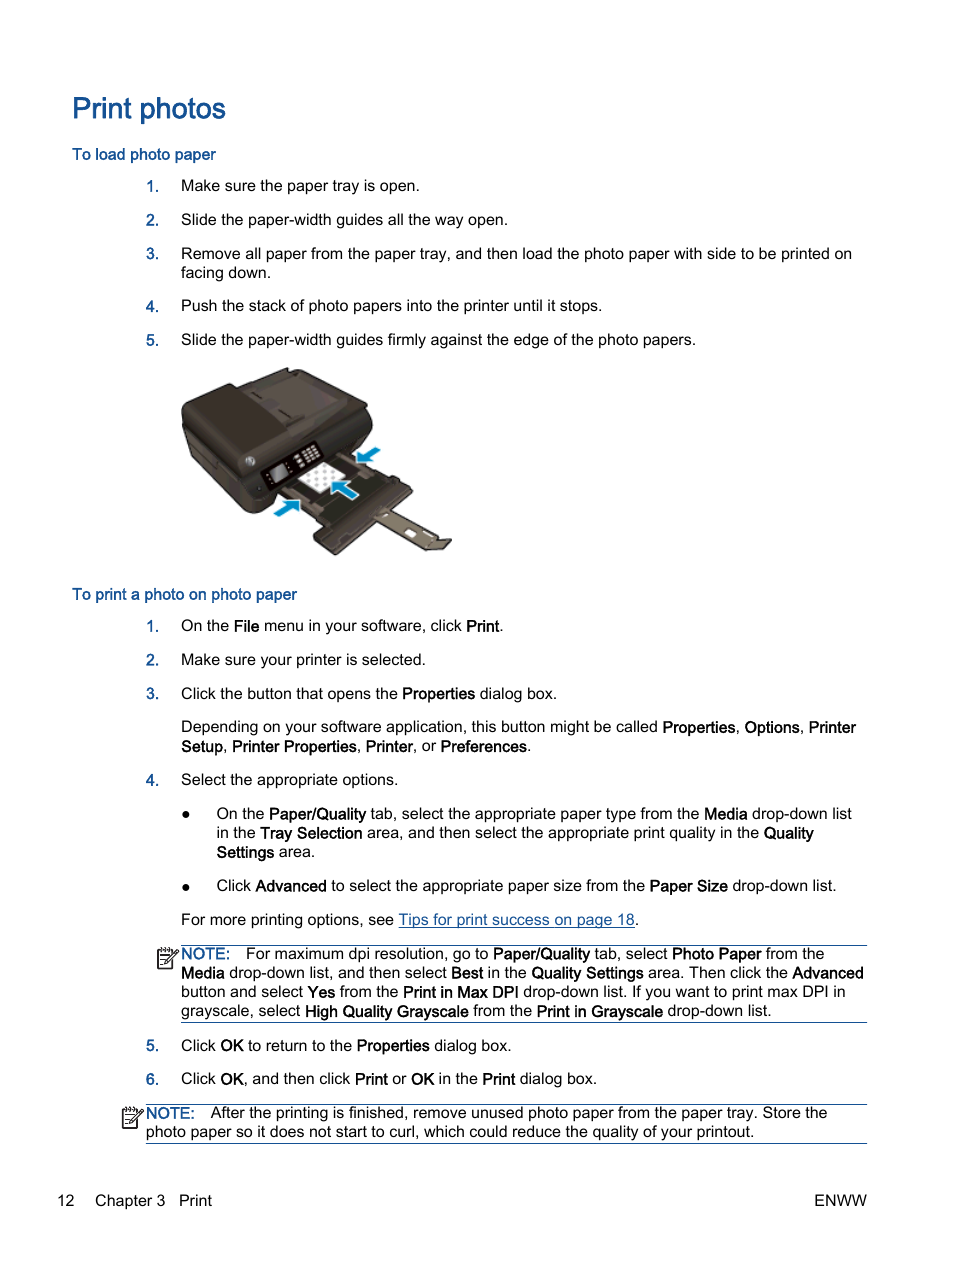 Print photos | HP Officejet 4630 e-All-in-One Printer User Manual